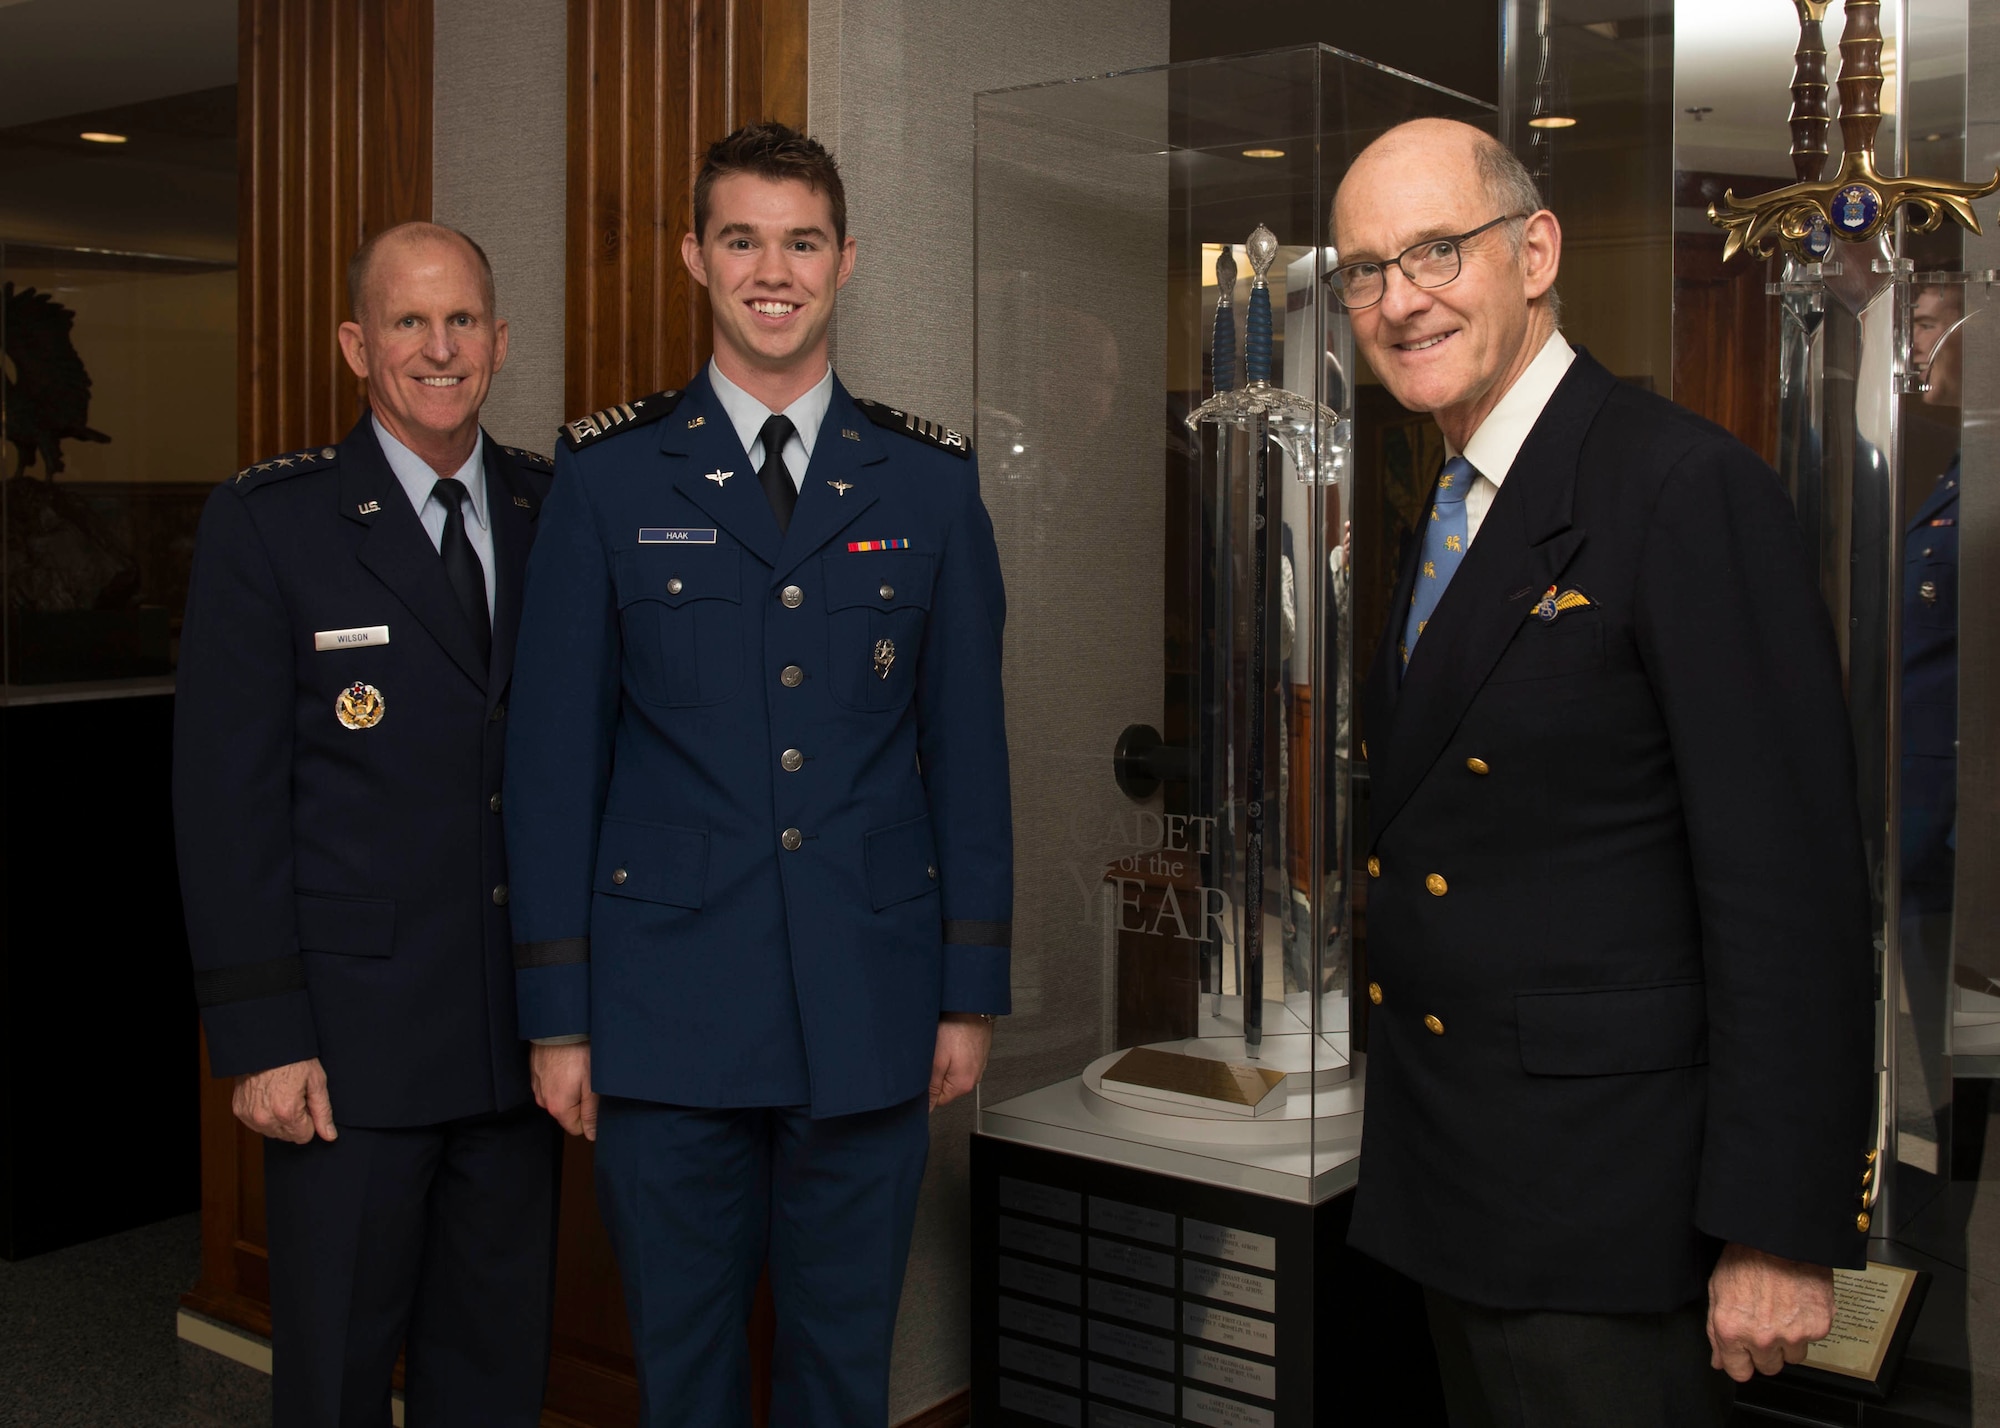 Air Force Vice Chief of Staff Gen. Stephen V. Wilson, Cadet 2nd Class Kyle Haak and Dr. The Hon. Gilbert Greenall, Commodore of the Royal Air Squadron, pose for a photo in front of the Millennium Sword at the Pentagon, Arlington, Va., Nov. 6, 2018. Haak was honored as the British Air Squadron’s 2018 Cadet of the Year. Recipients of the award receive the Millennium Sword, which is kept on permanent display in the Pentagon. (U.S. Air Force photo by Staff Sgt. Victoria H. Taylor)